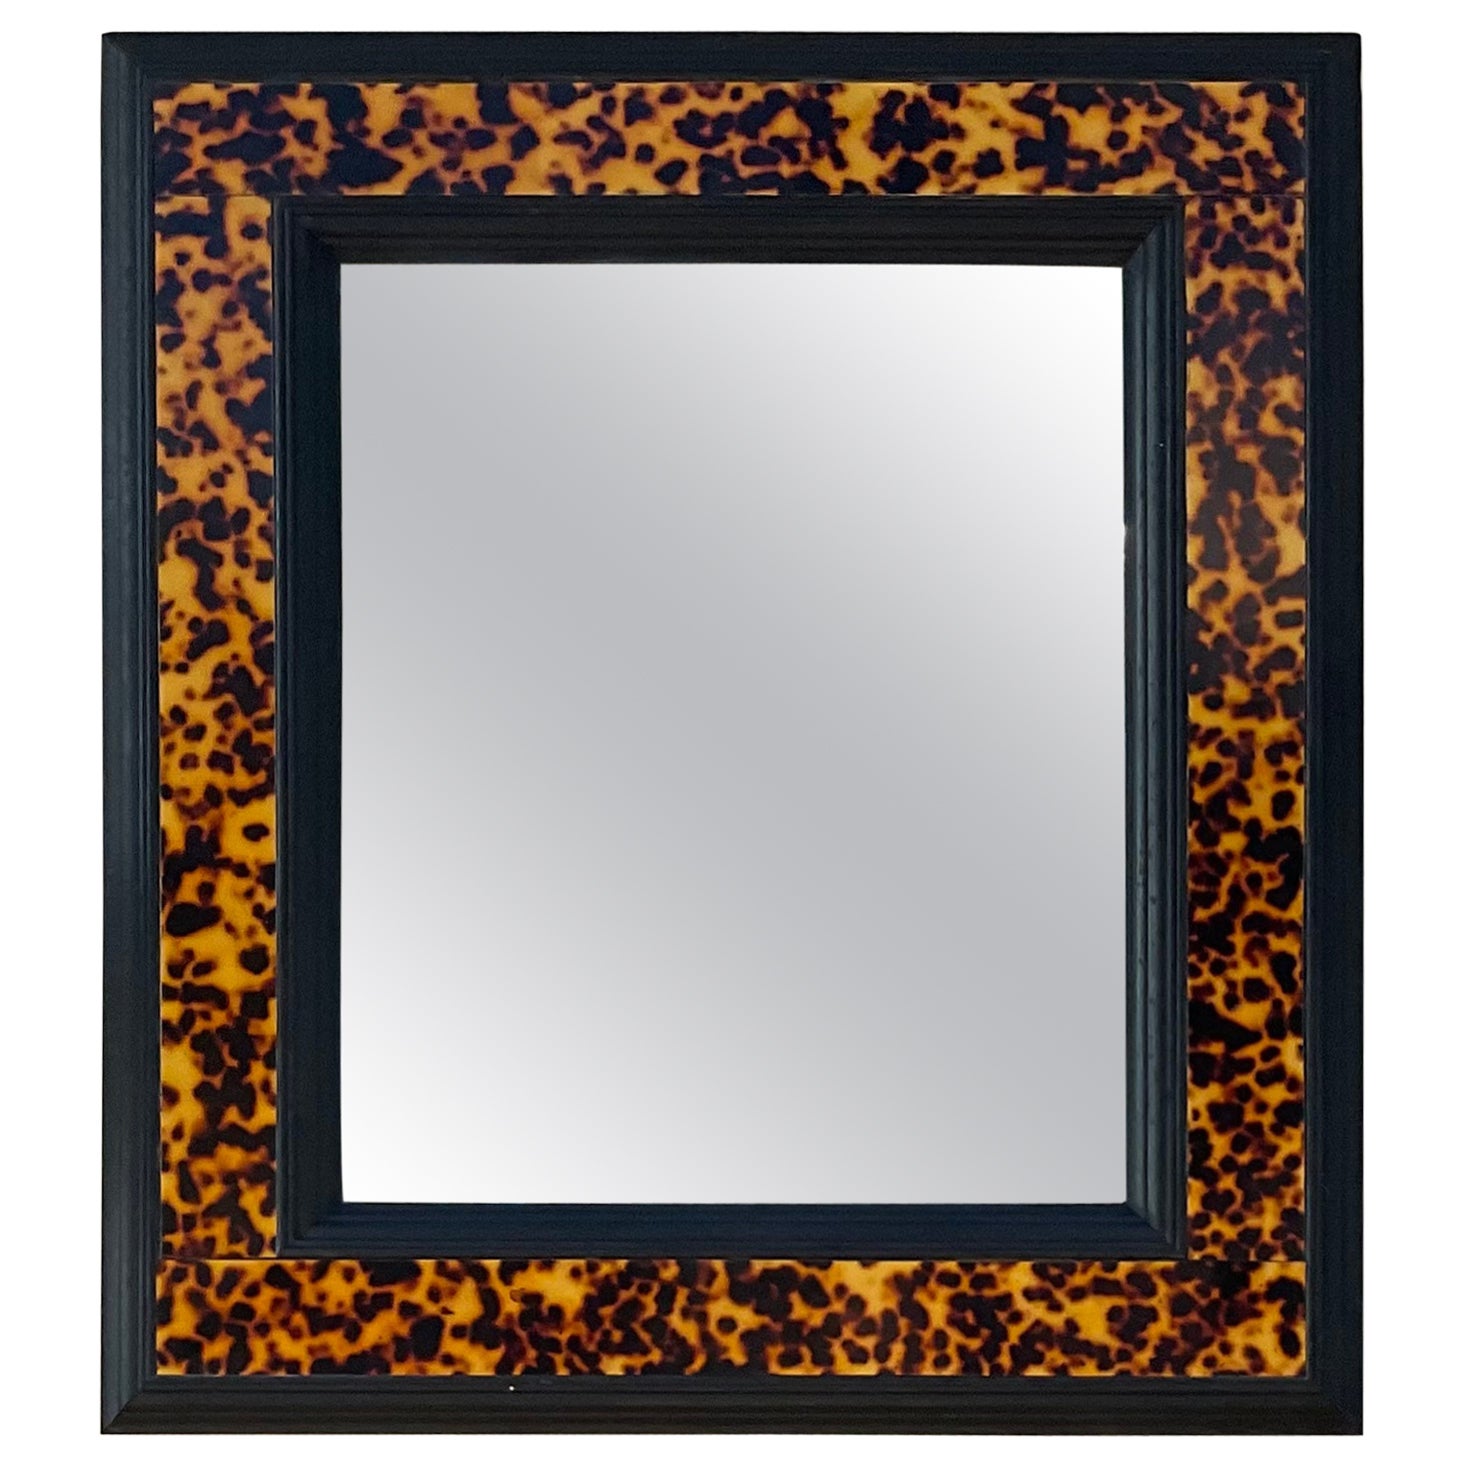 Turtle Shell Lucite Faux Framed Turtle Mirror